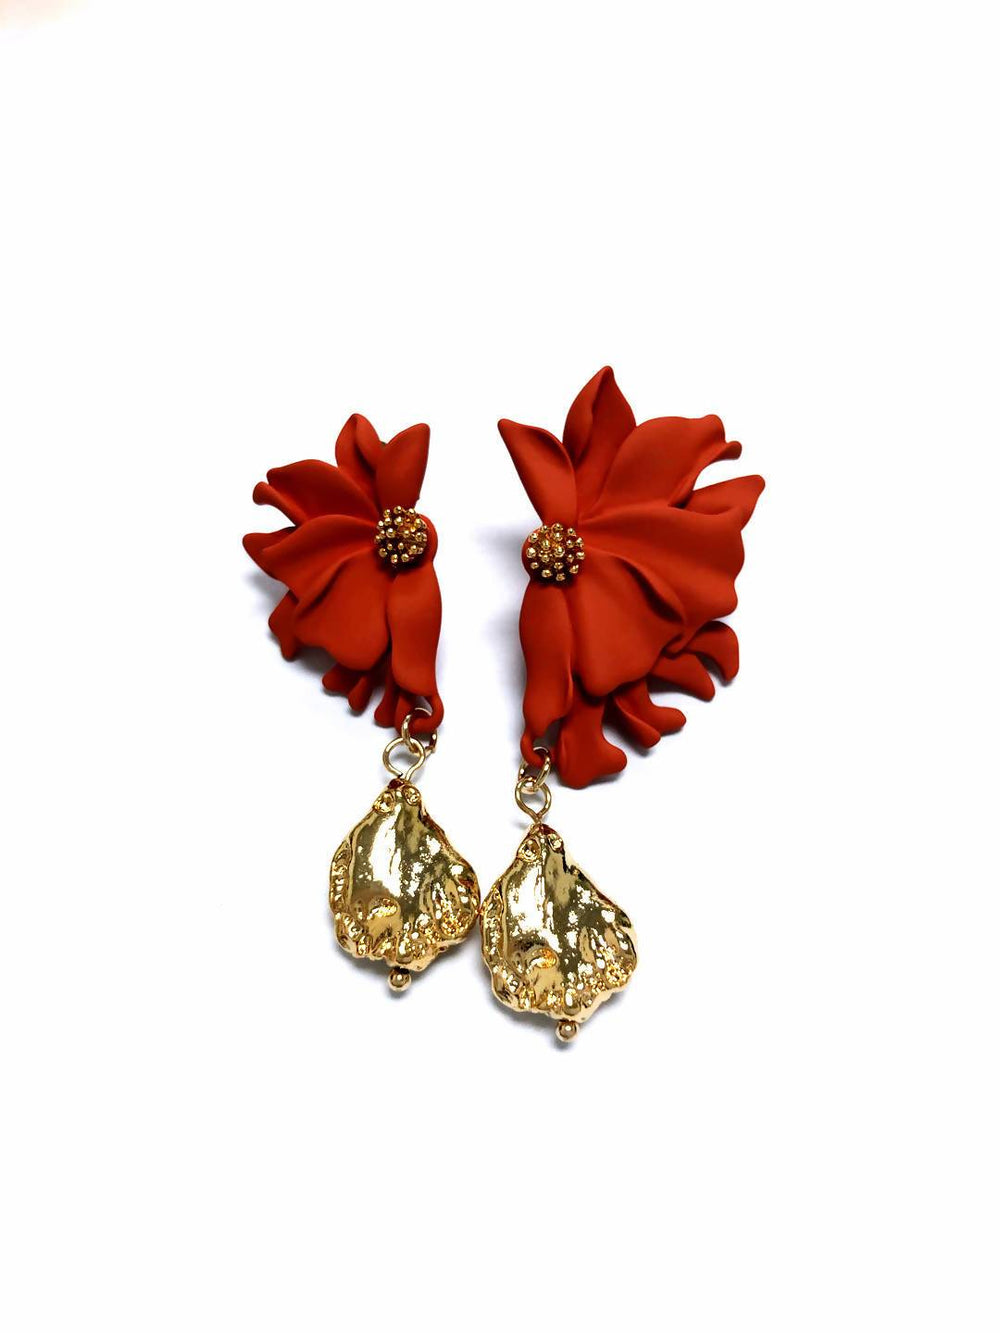 Flora Earrings - 5 Different Colors - Earrings - Forest Jewelry - Naiise